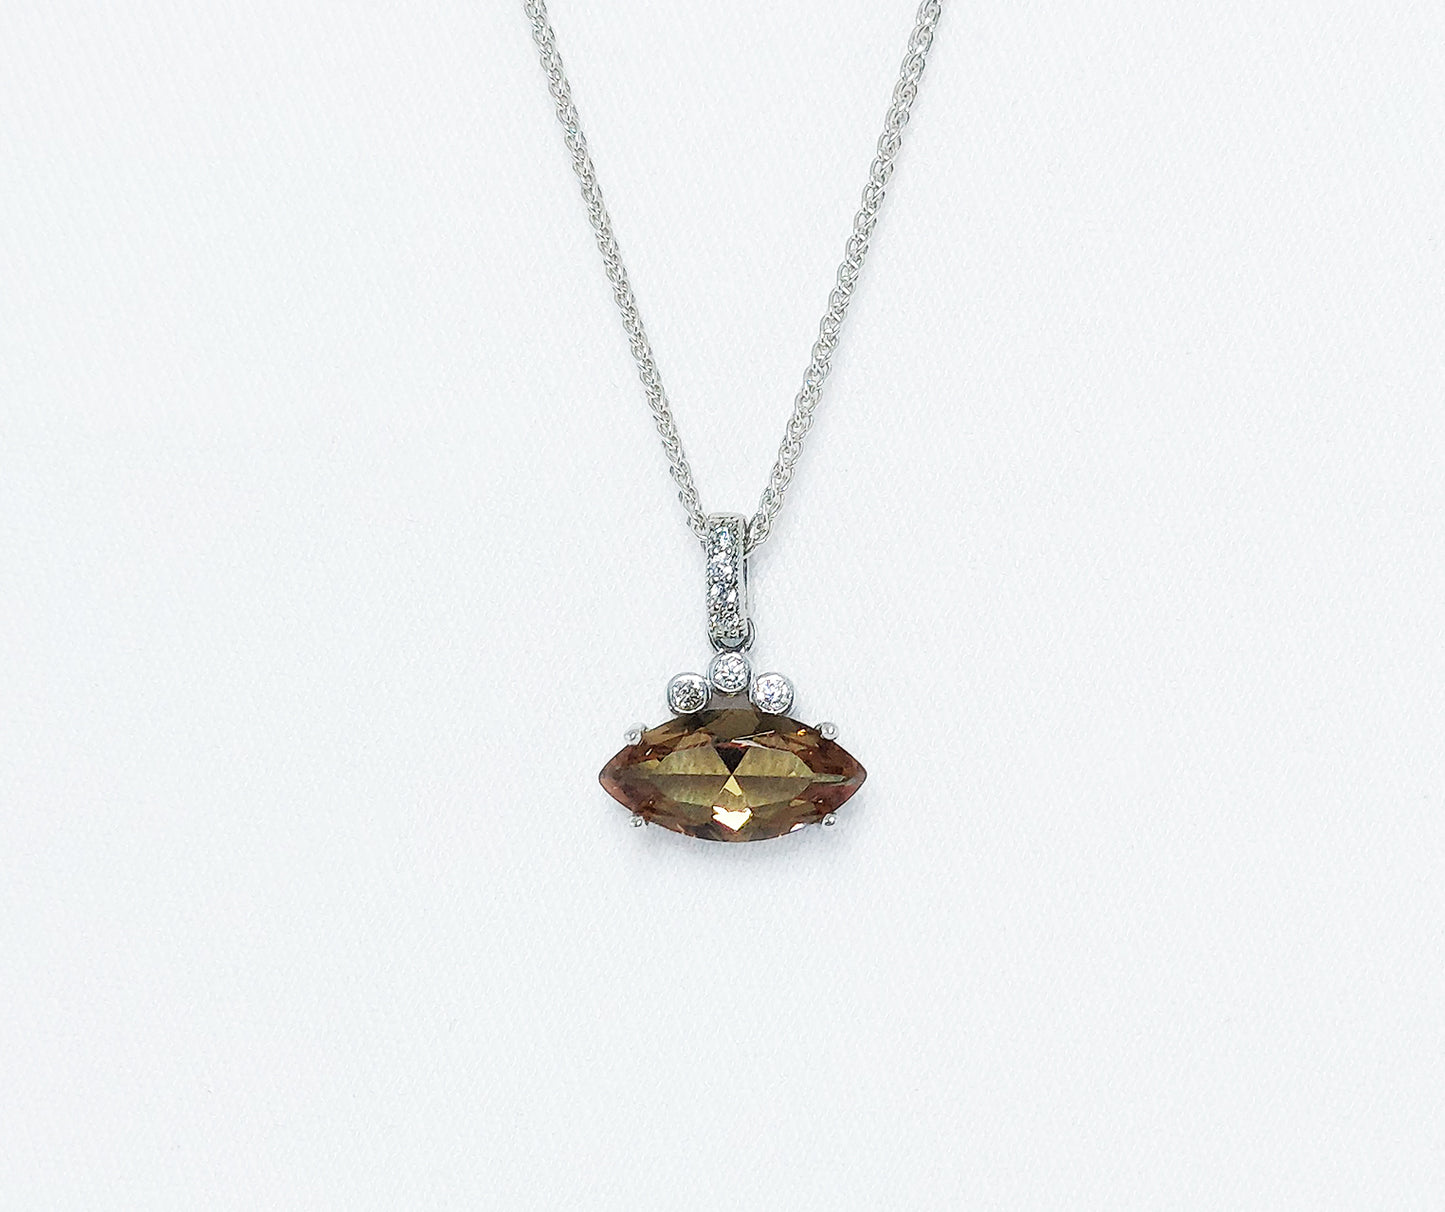 Sterling Silver Zultanite Pendant with Cubic Zirconias